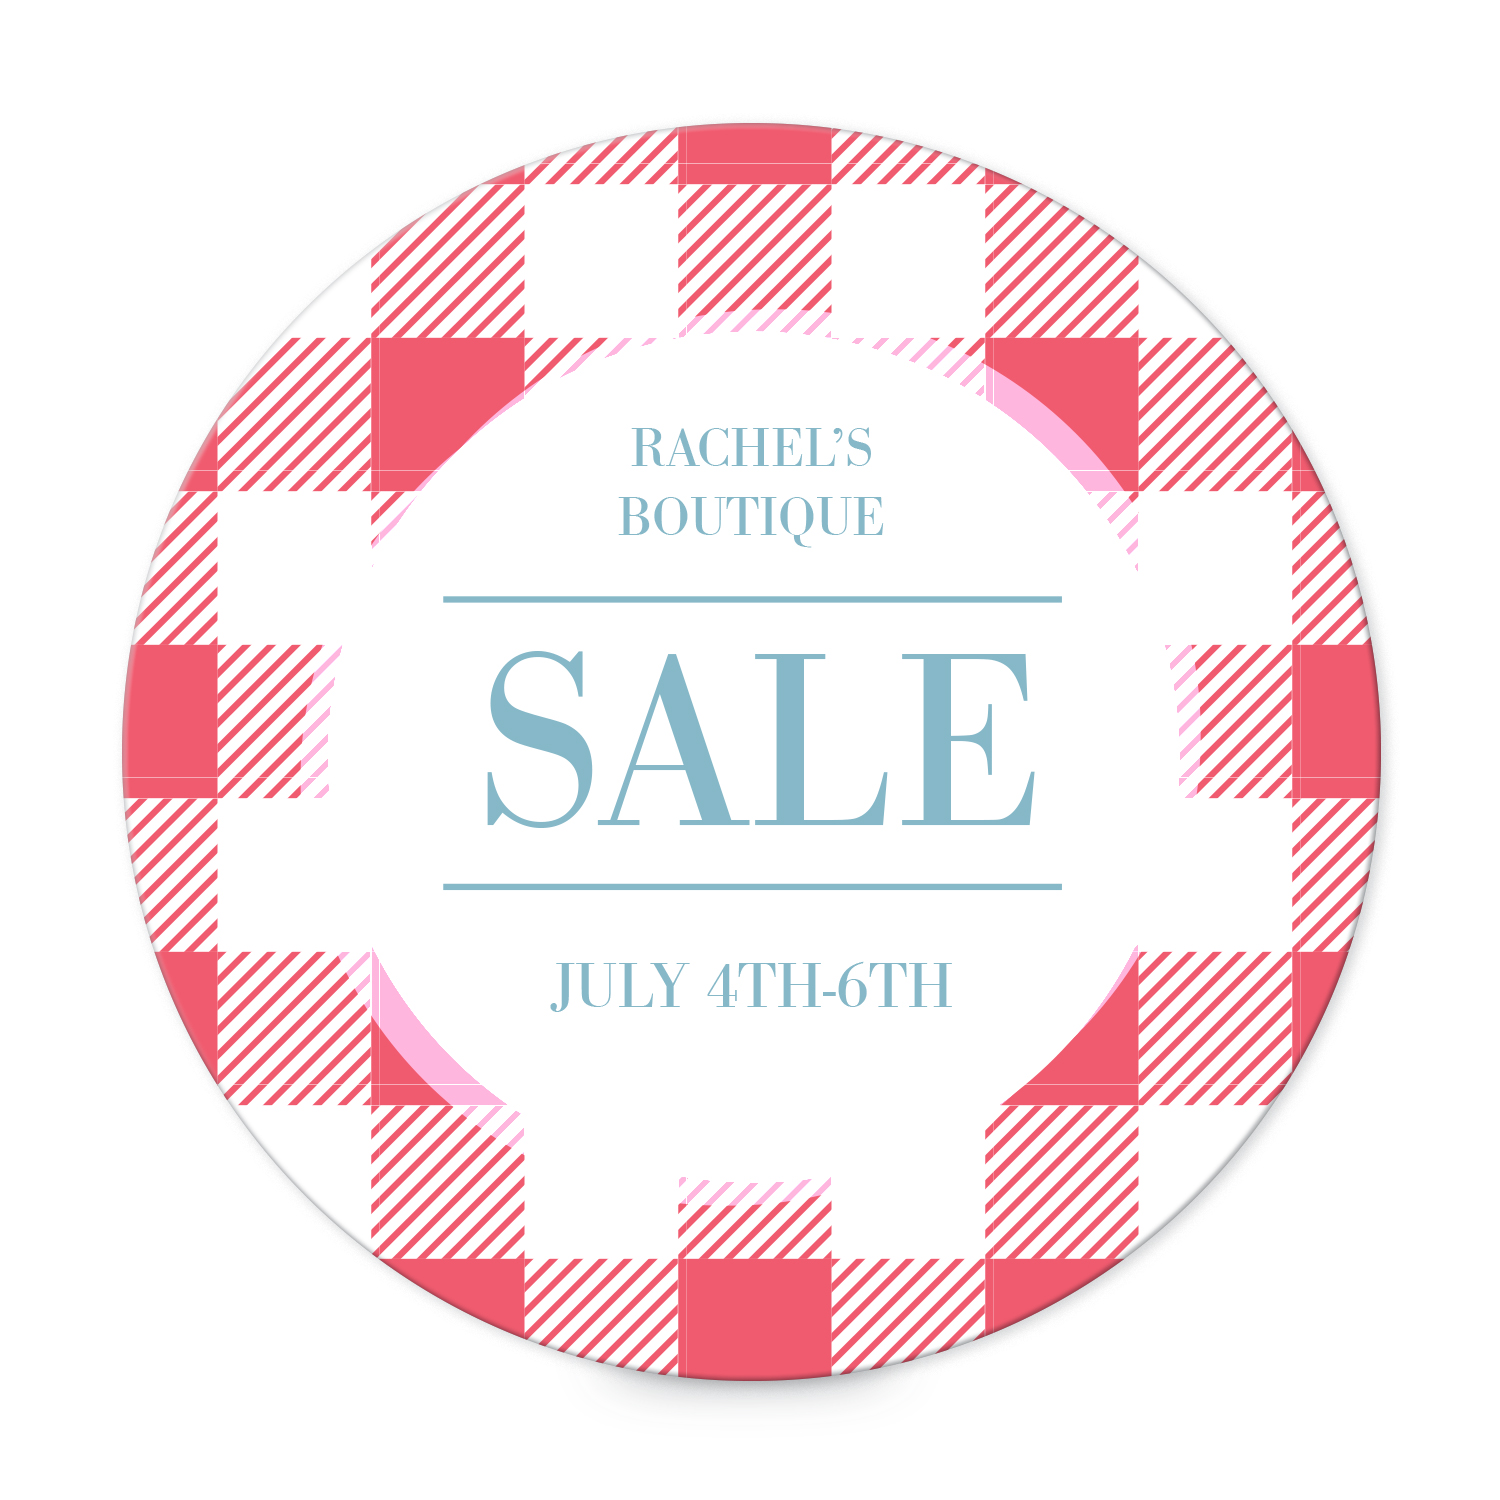 Gingham tablecloth print round label templates